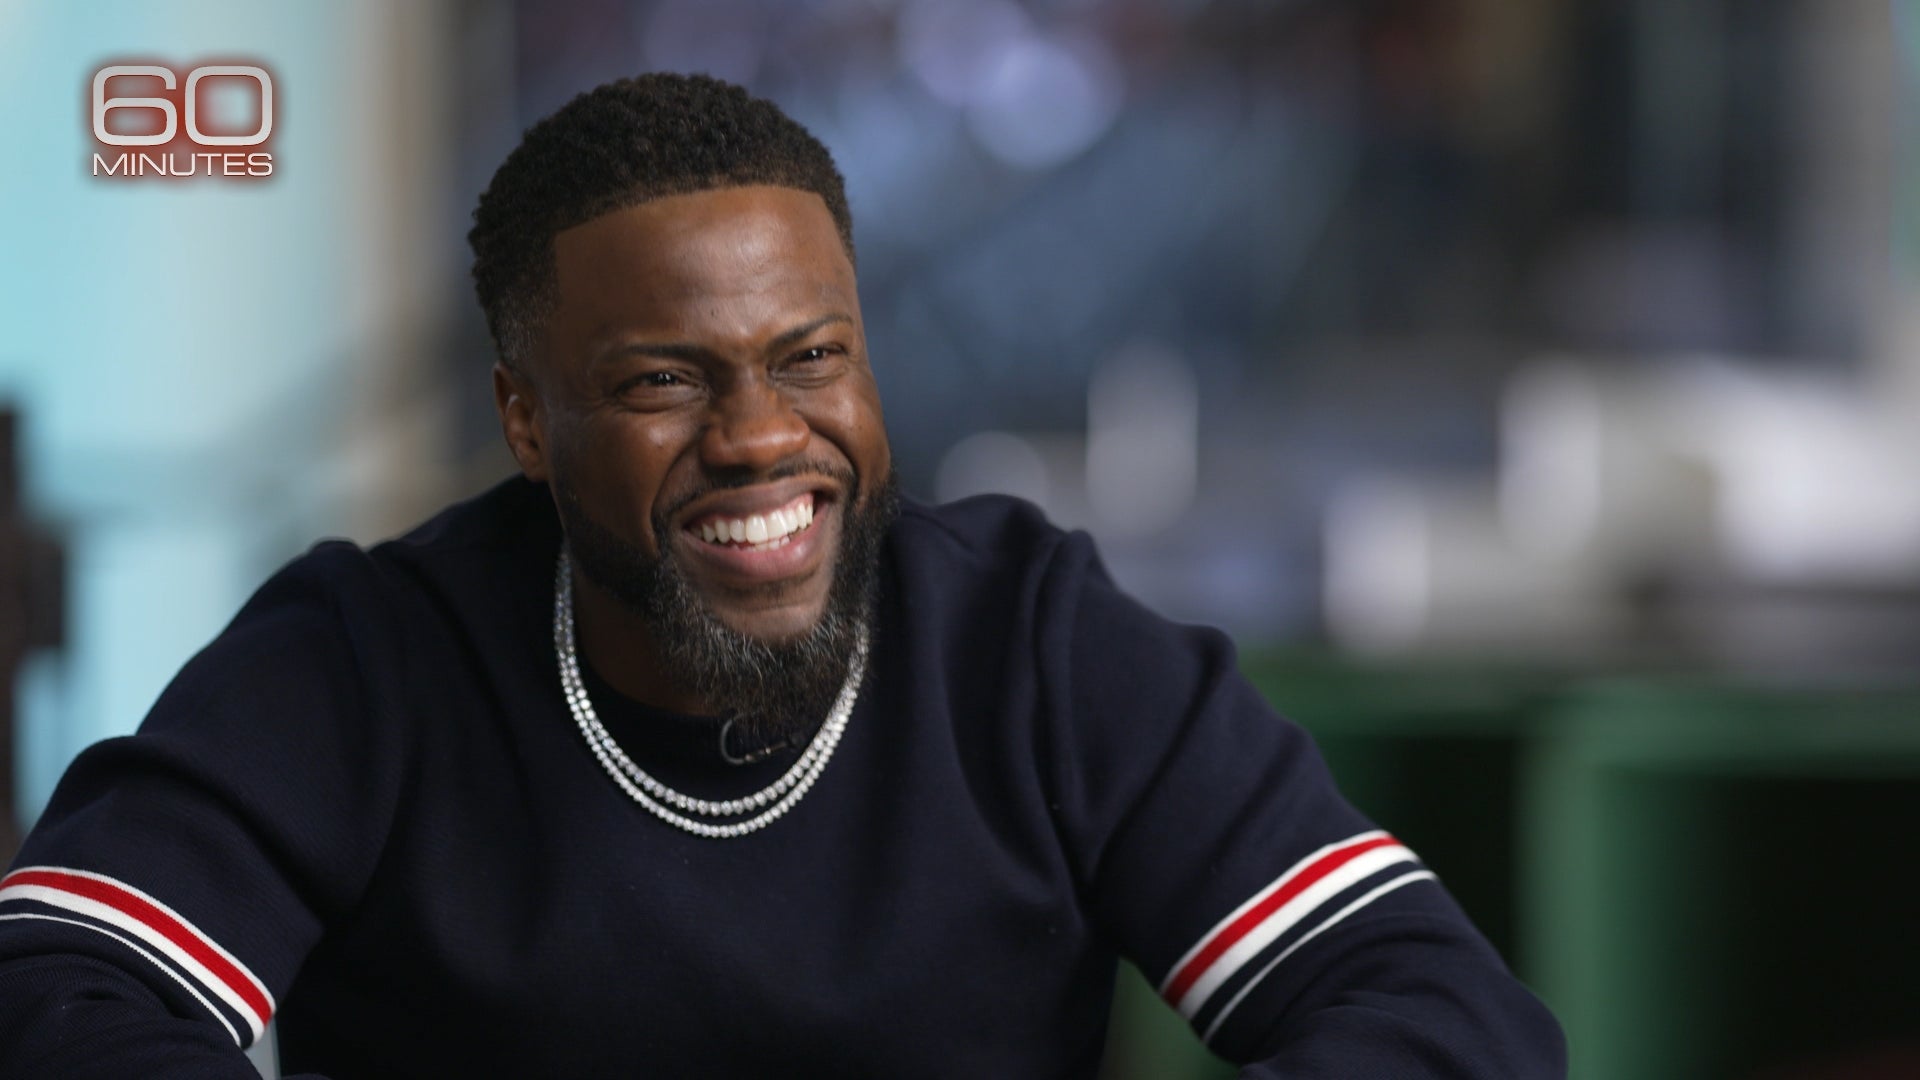 EXCLUSIVE Clip: Kevin Hart Details His Strip Club Roots On '60 Minutes'